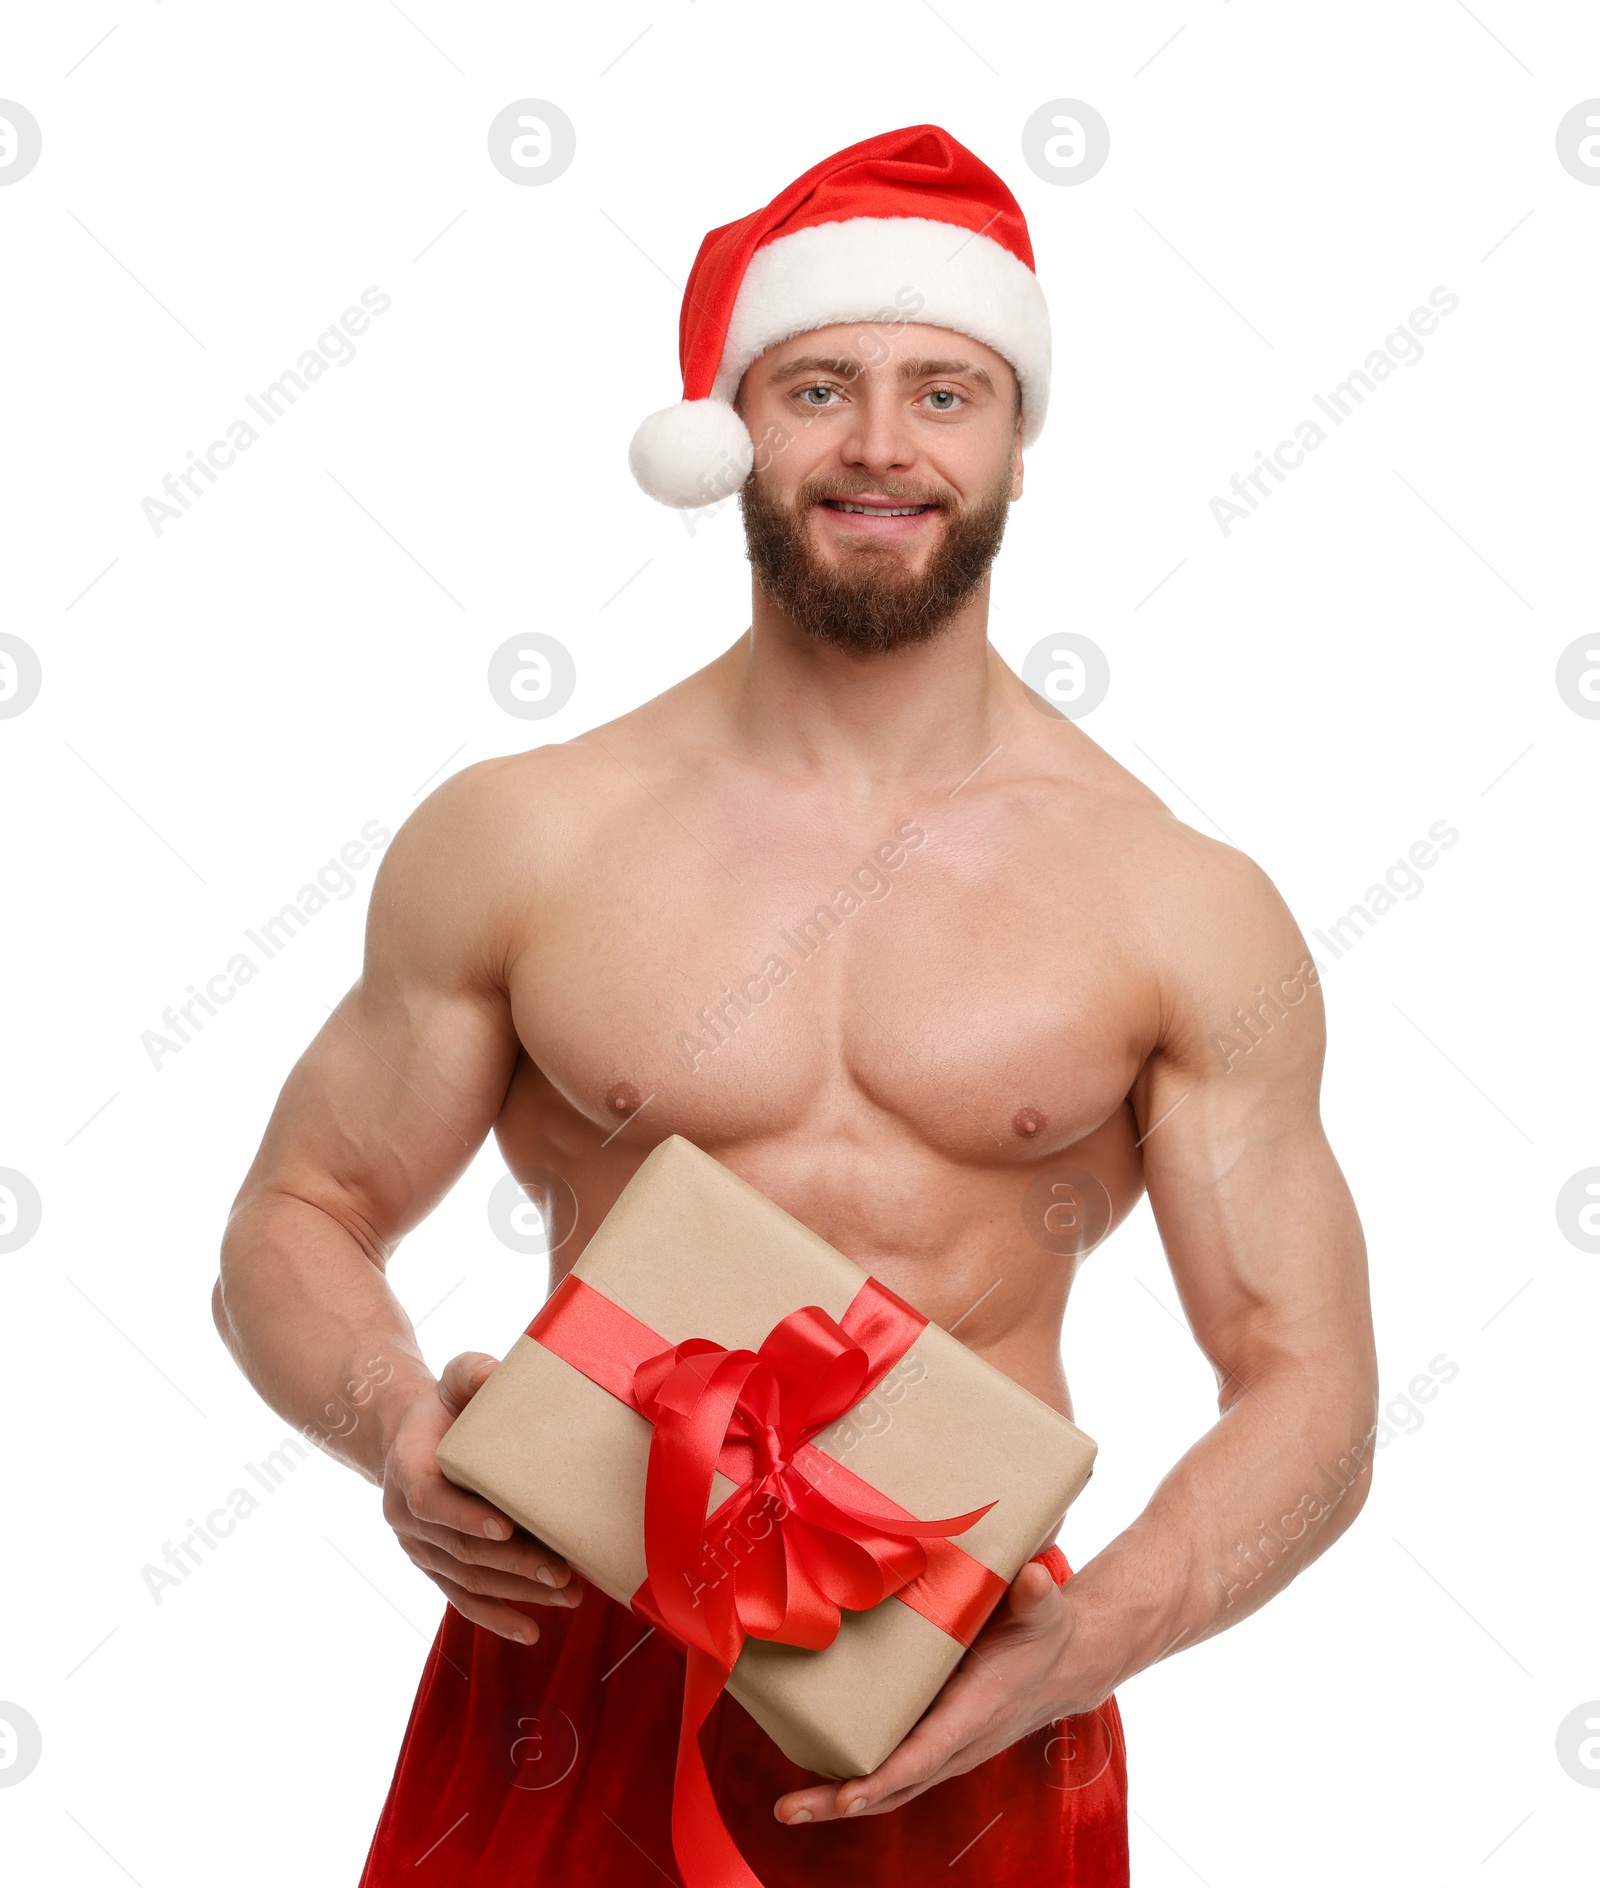 Photo of Attractive young man with muscular body in Santa hat holding Christmas gift box on white background